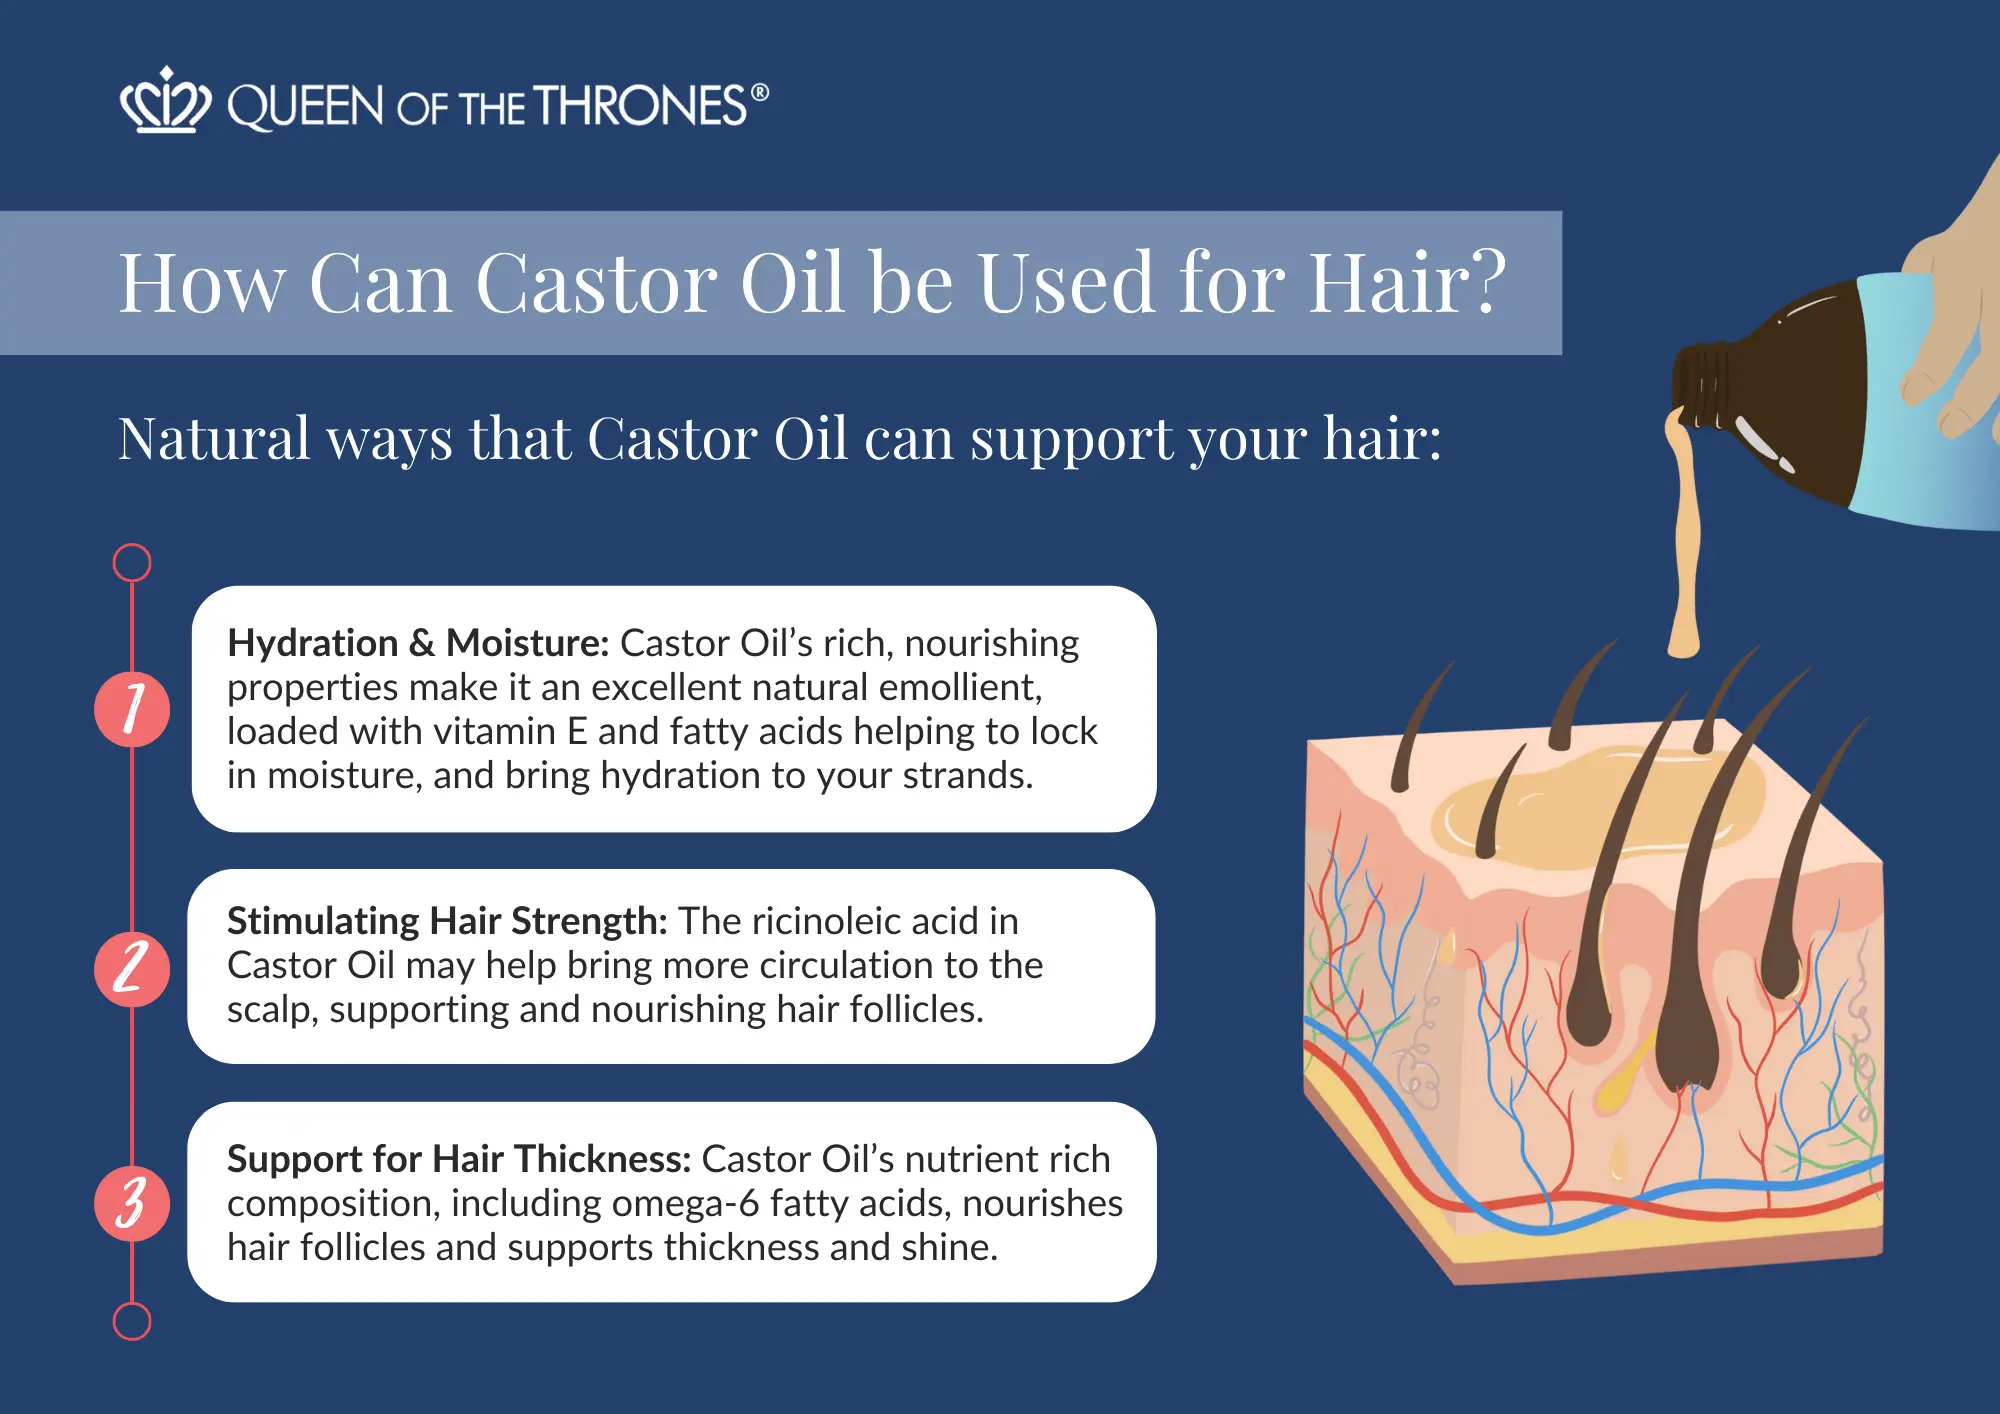 How can Castor Oil be used for Hair by Queen of the Thrones